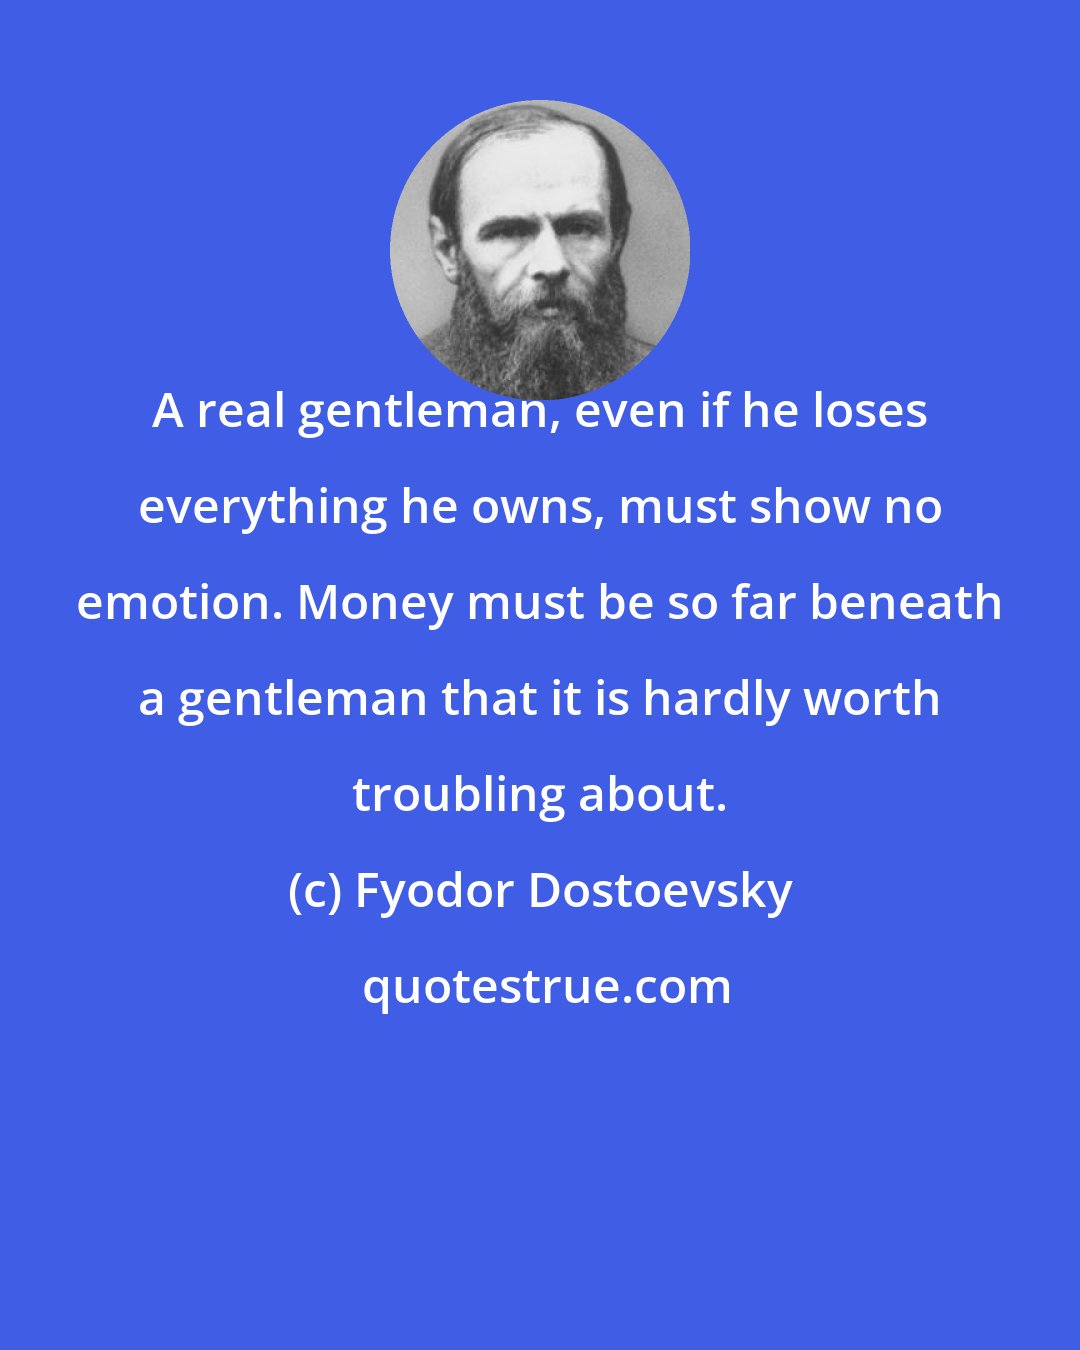 Fyodor Dostoevsky: A real gentleman, even if he loses everything he owns, must show no emotion. Money must be so far beneath a gentleman that it is hardly worth troubling about.